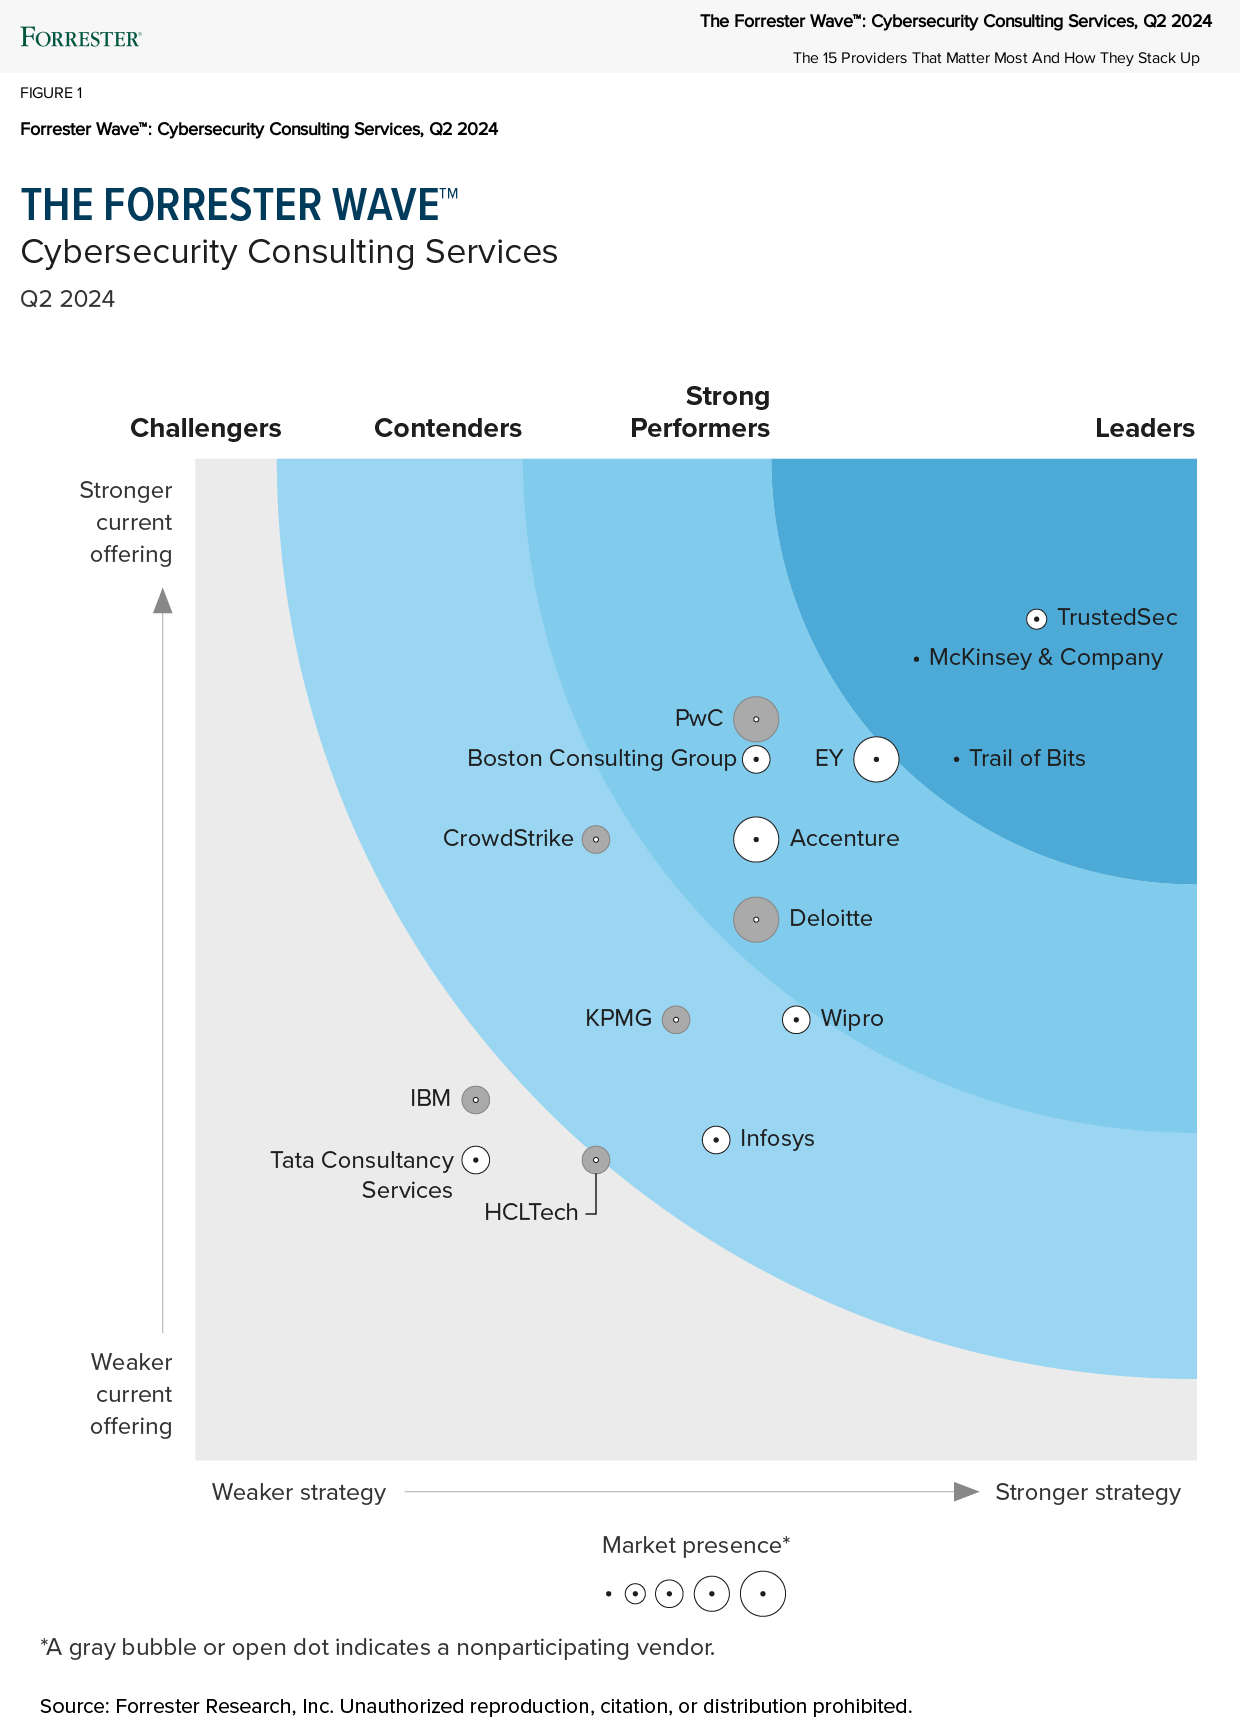 Forrester industry mapping showing ToB at the top